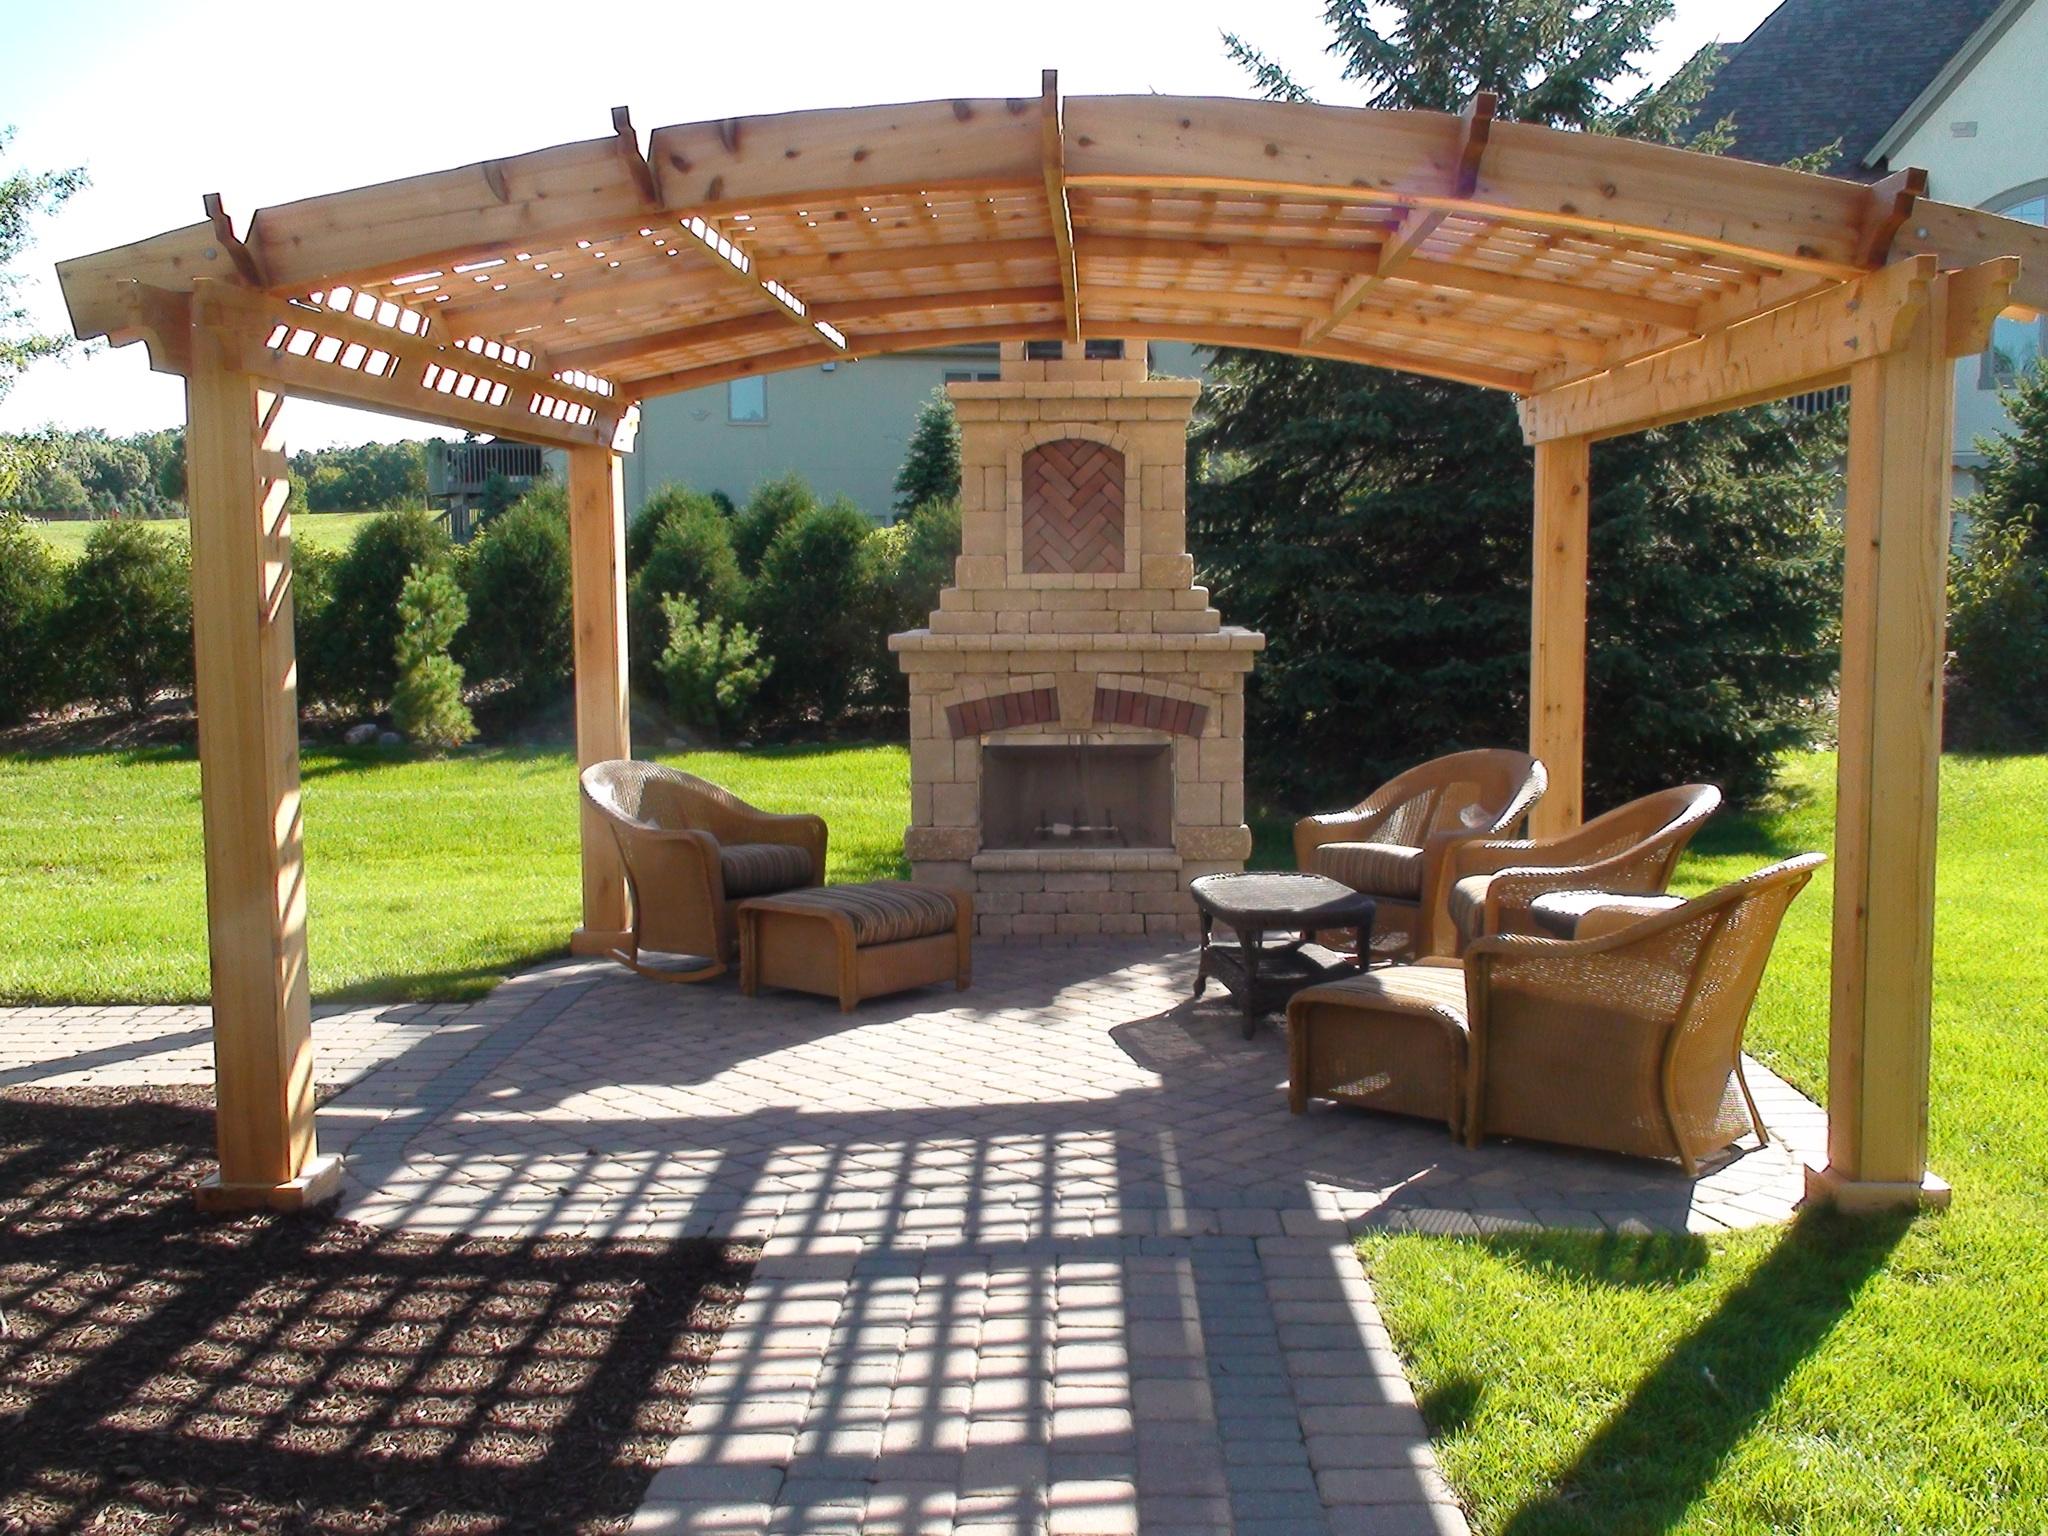 Arched Pergola starts from $10,500.00